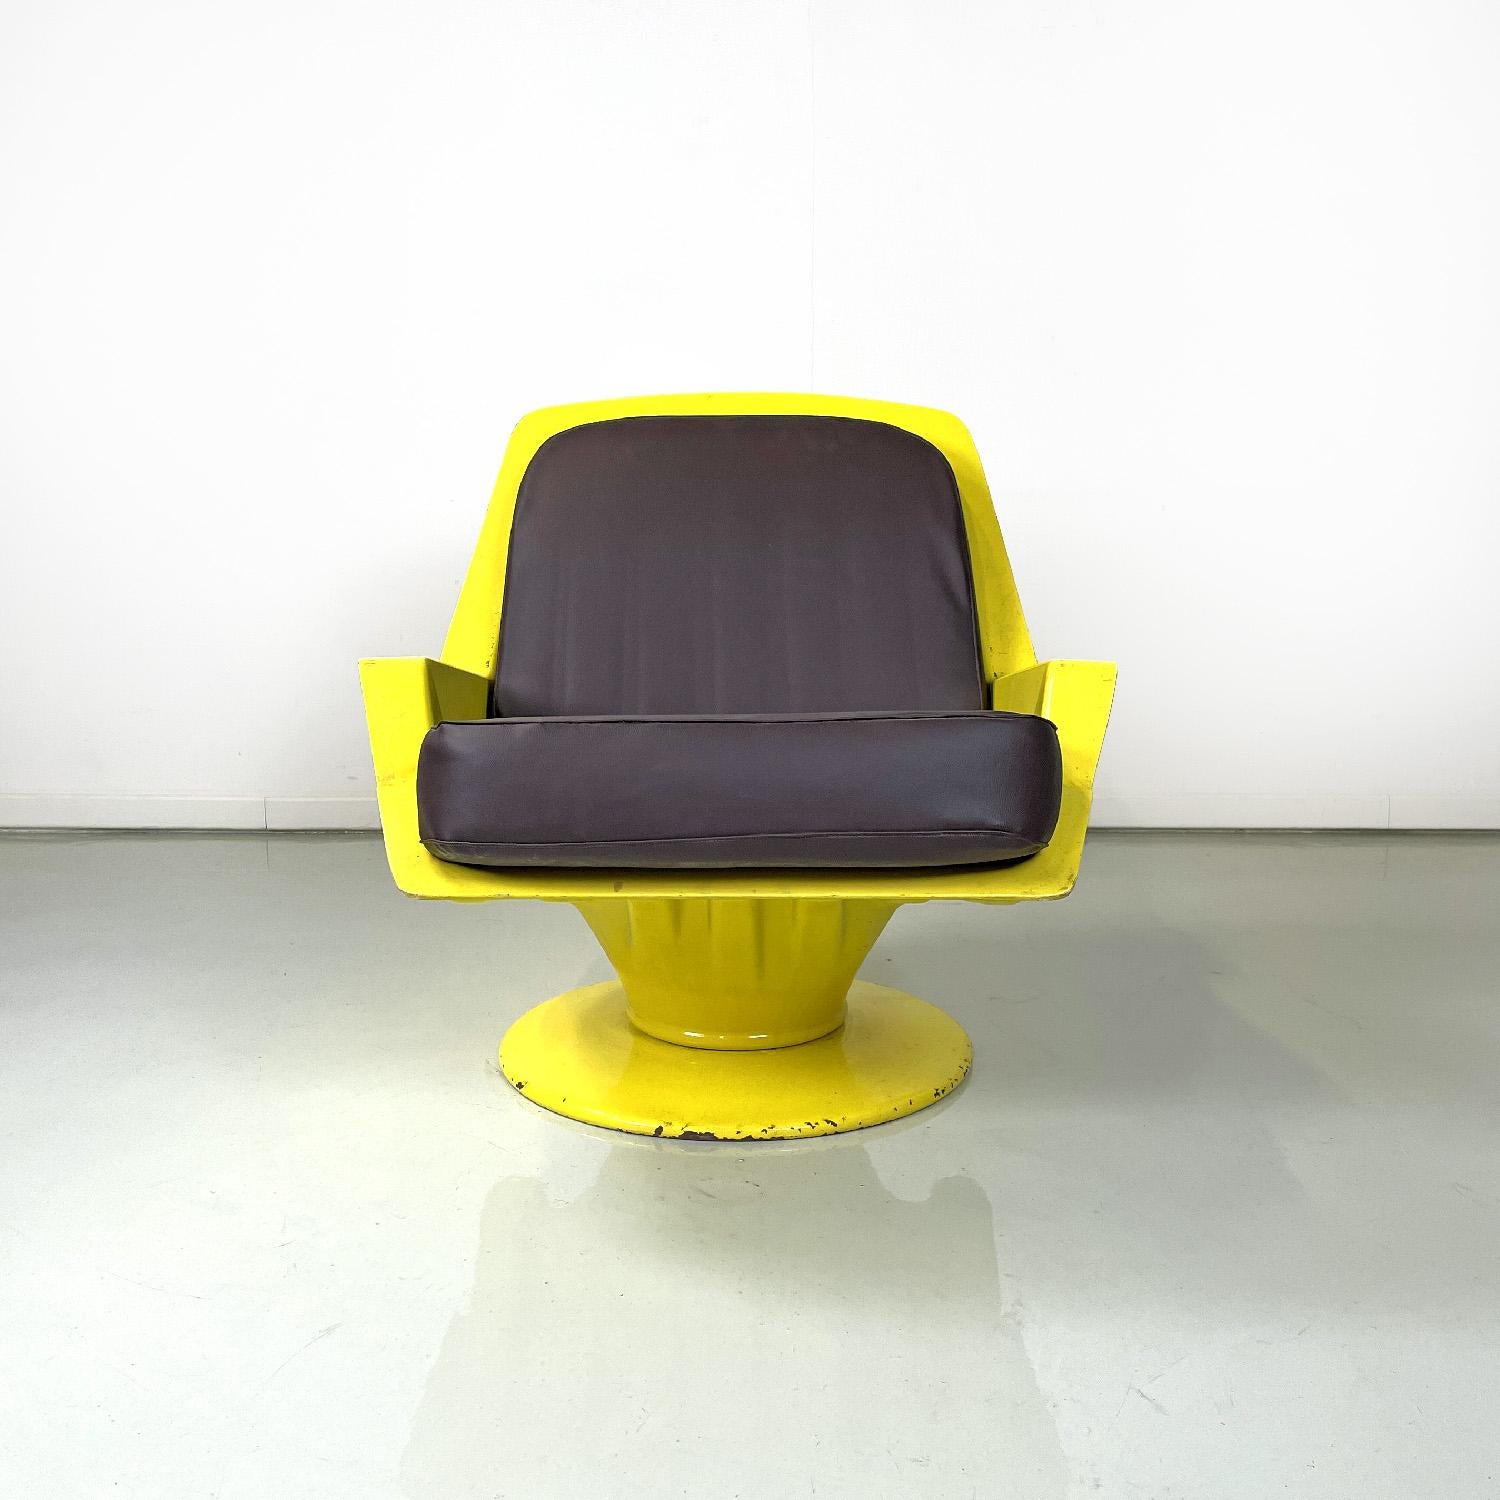 Italian mid-century modern armchair Nike by Richard Neagle for Sormani, 1960s
Armchair mod. Nike with external structure in yellow painted metal. The structure rests on a round base and forms the armrests, seat and backrest. It features two padded